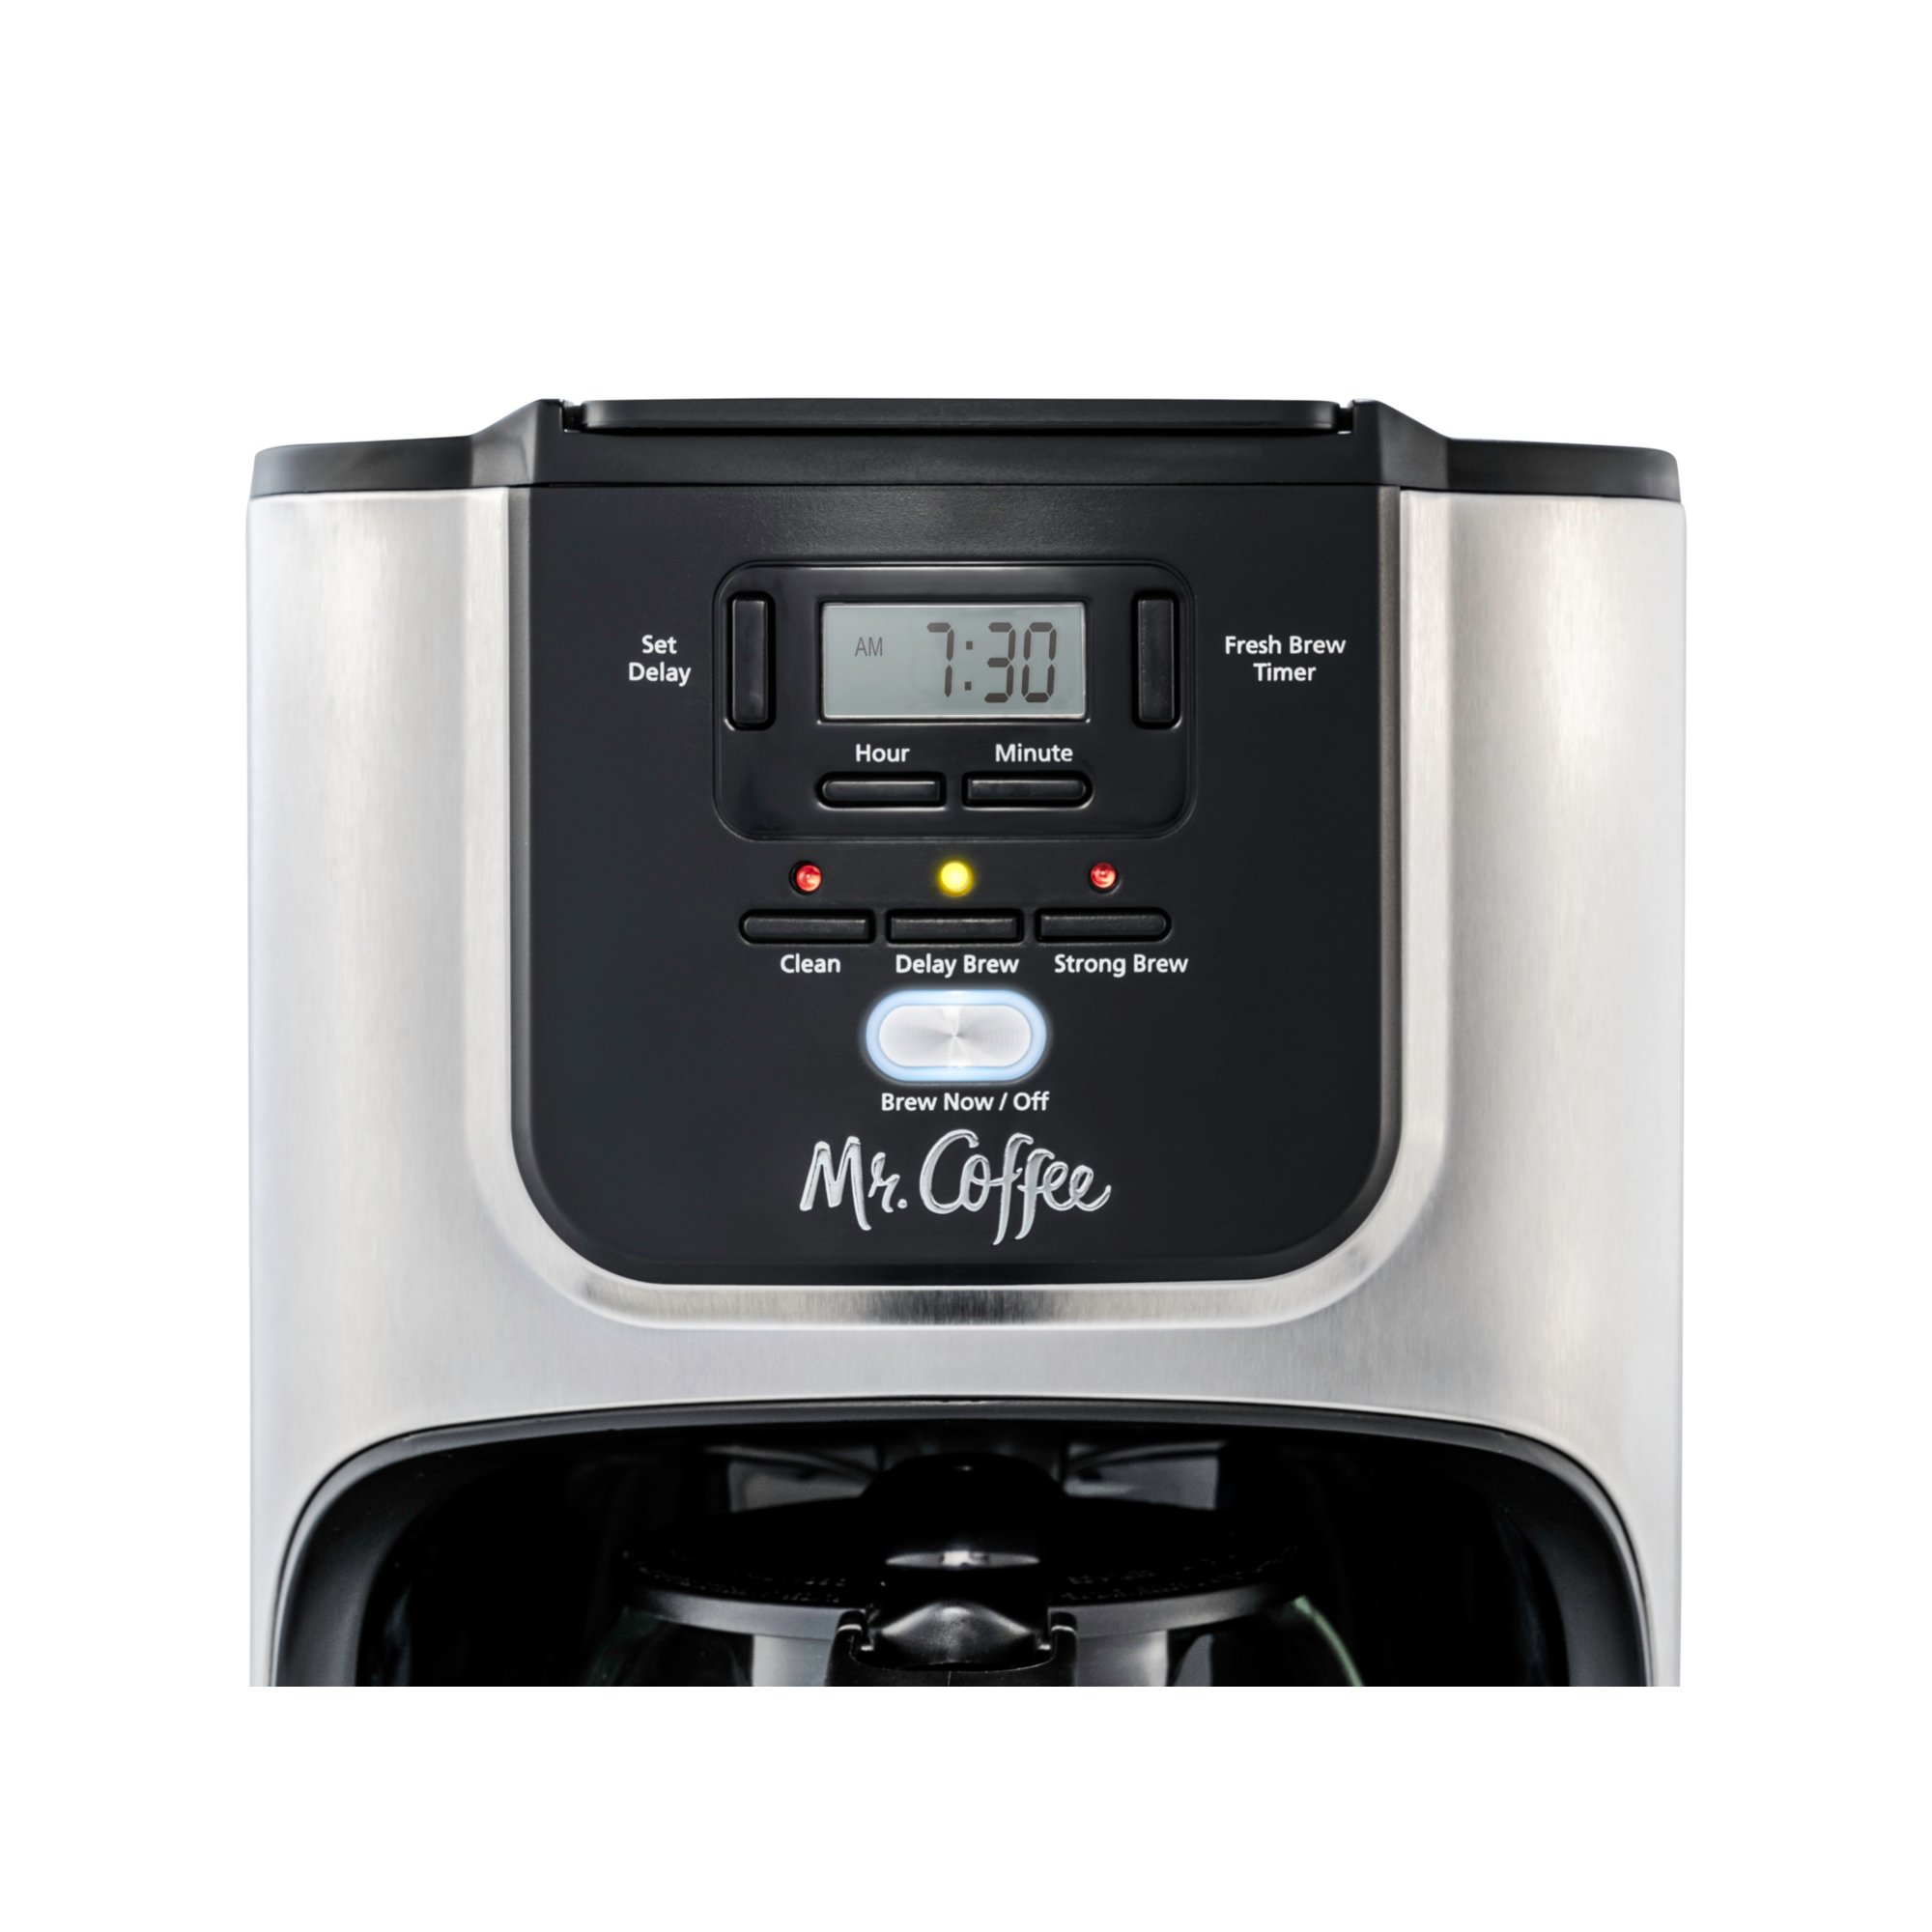 Mr. Coffee 12-Cup Programmable Coffeemaker, Rapid Brew, Red – R